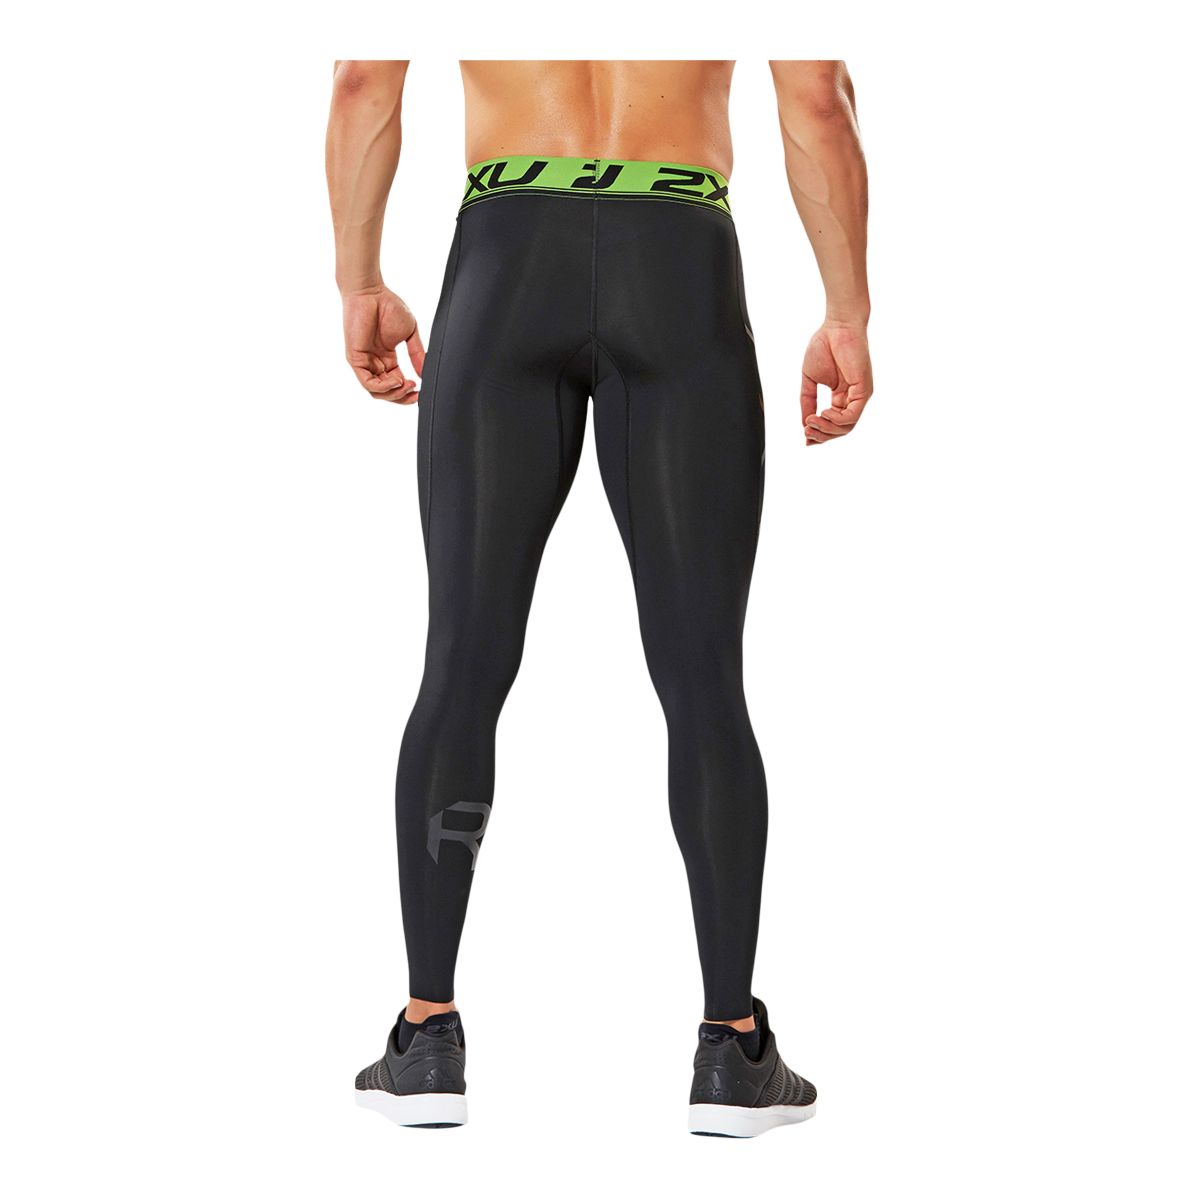  2XU Men's Refresh Recovery Compression Tights, Black/Nero,  Medium : Clothing, Shoes & Jewelry